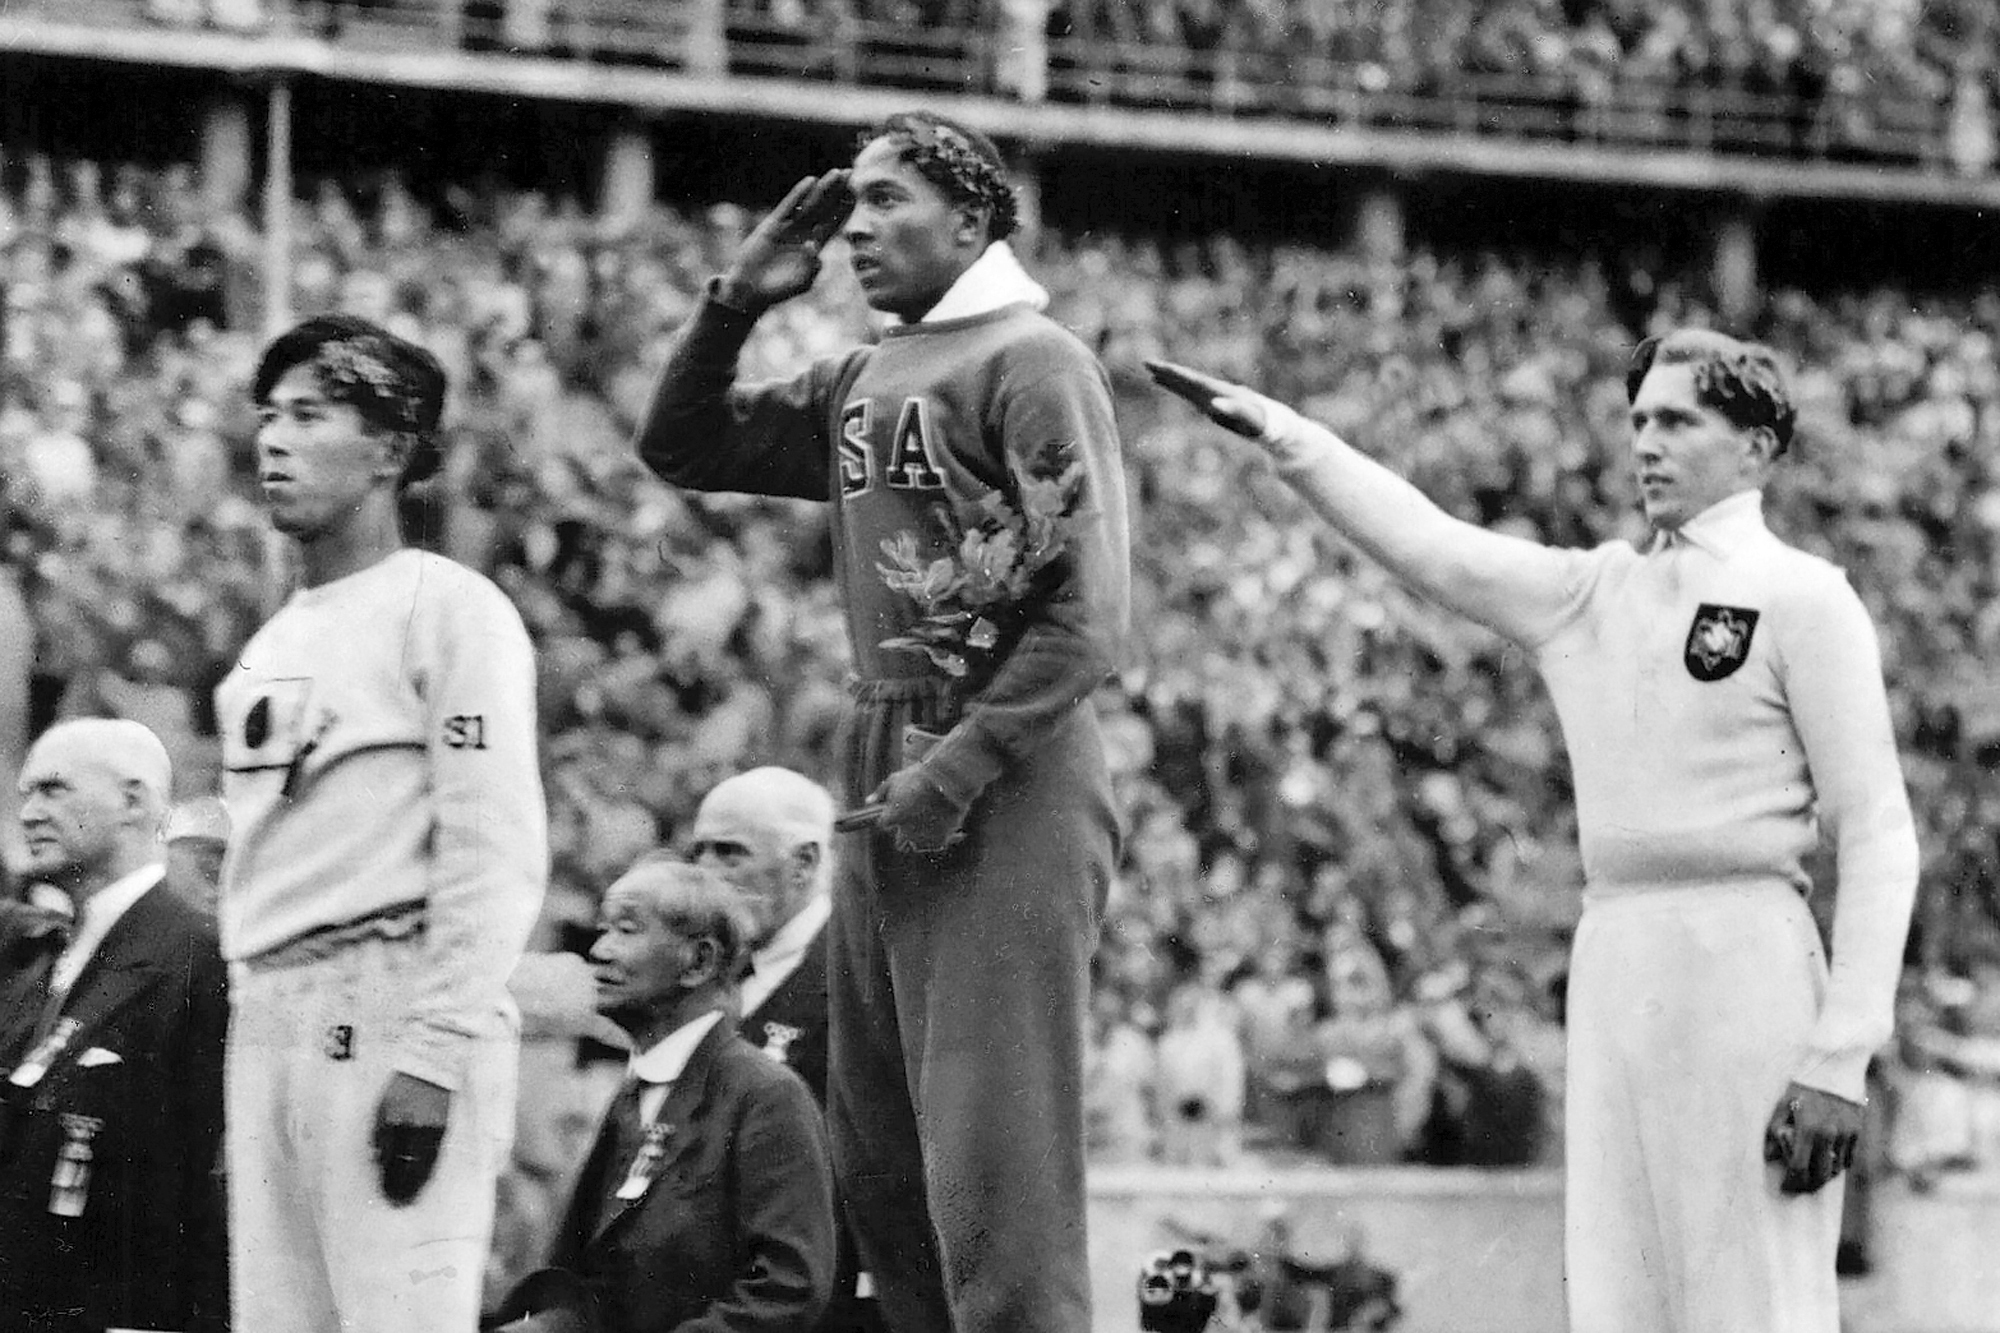 Medal of Olympian who defiedby embracing Jesse Owens goes under